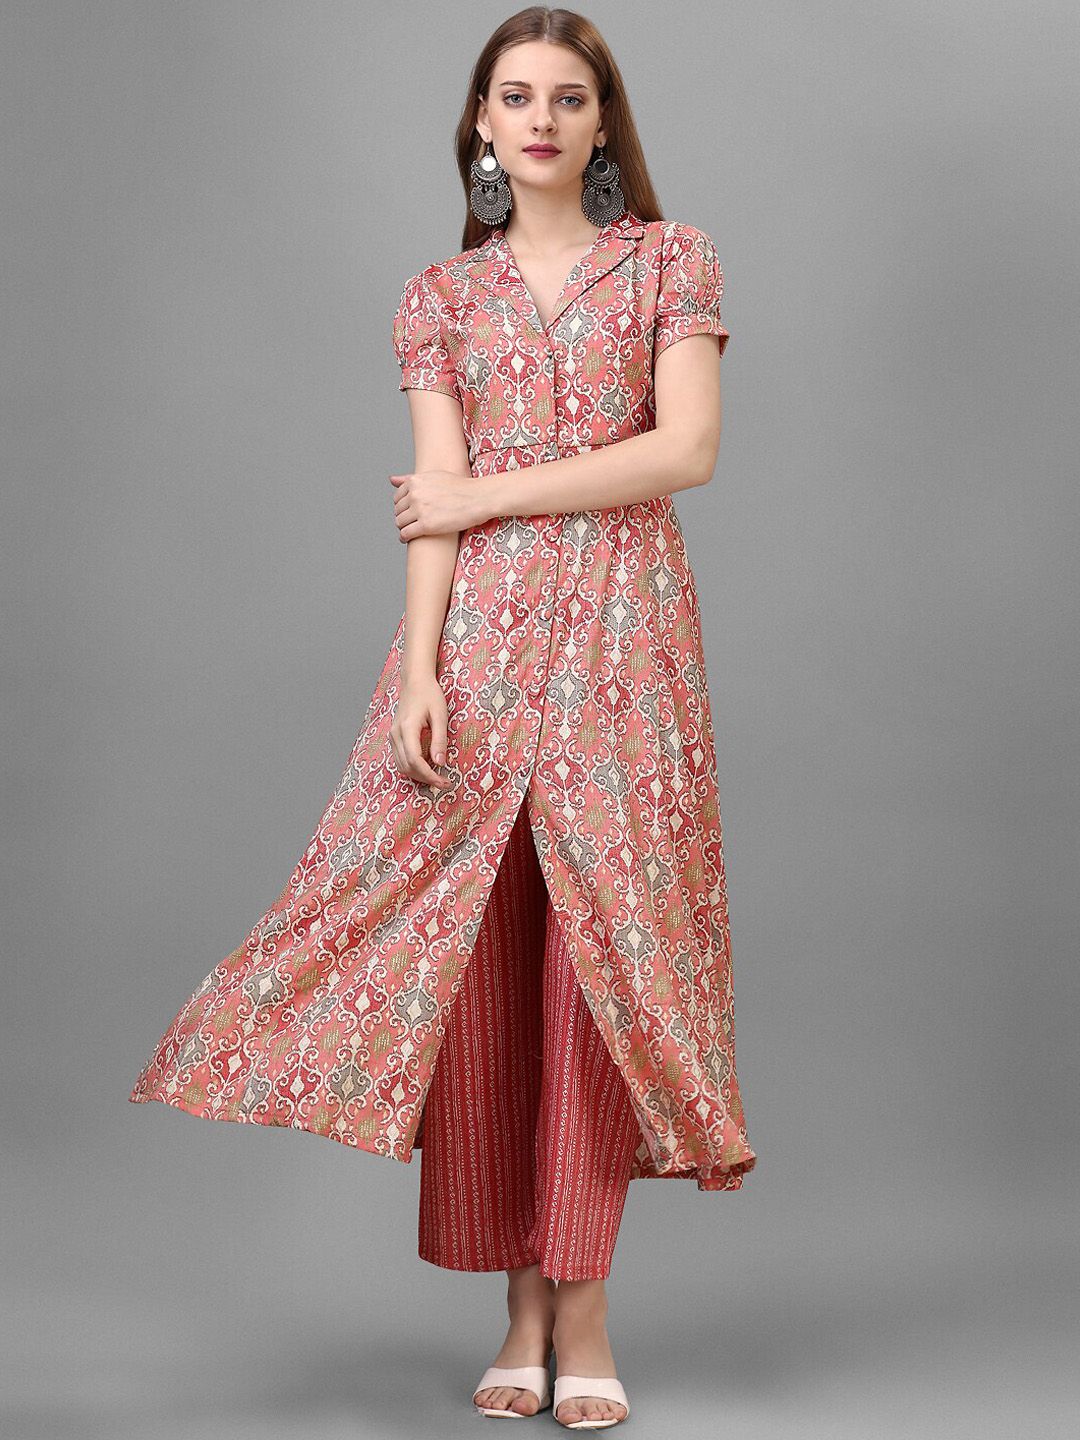 HOUSE OF MIRA Women Pink Printed Kurti with Trousers Price in India